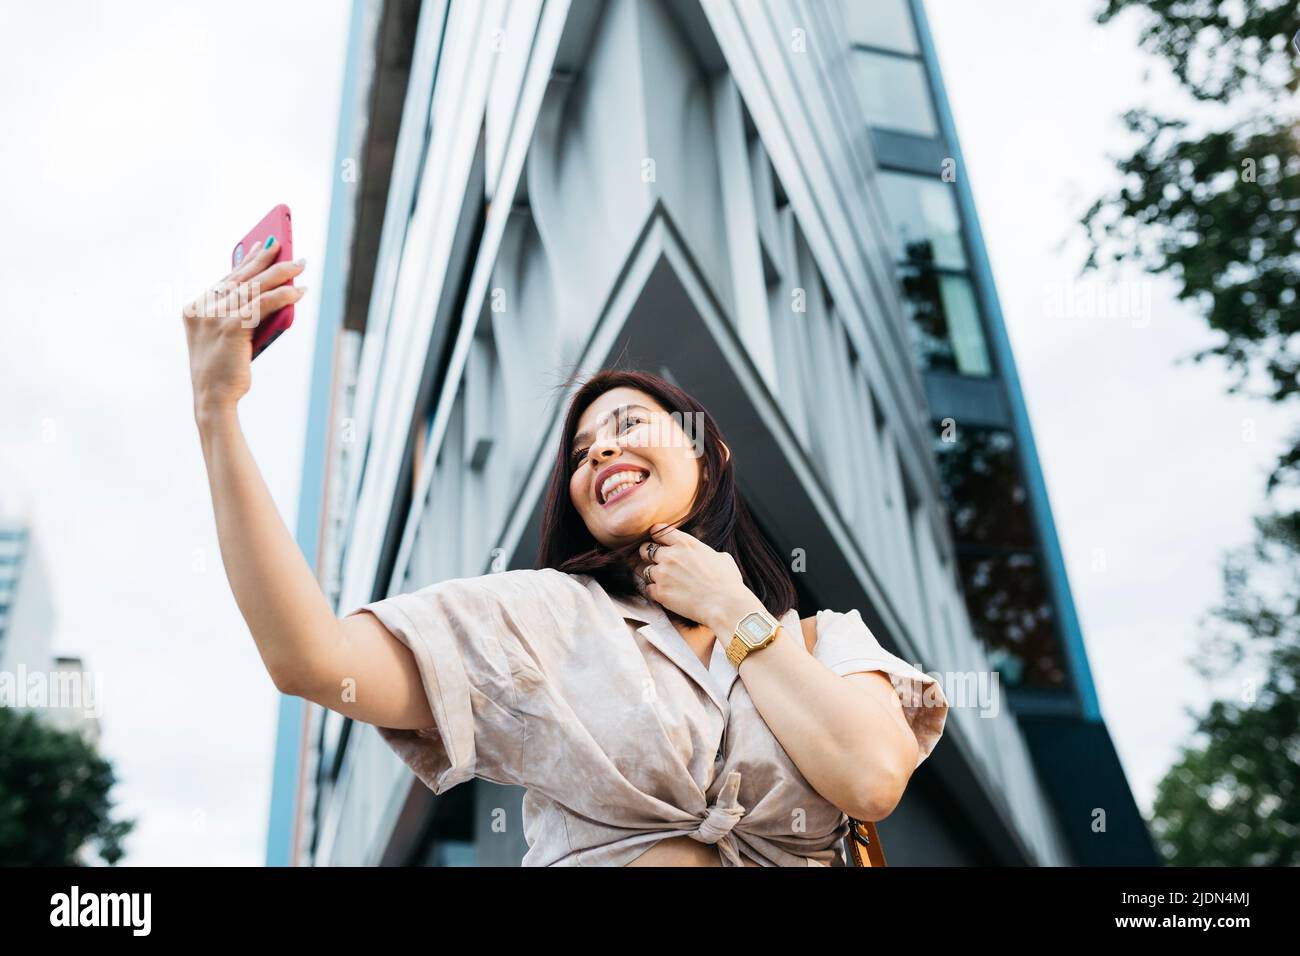 Young brunette woman taking a selfie on the street Stock Photo